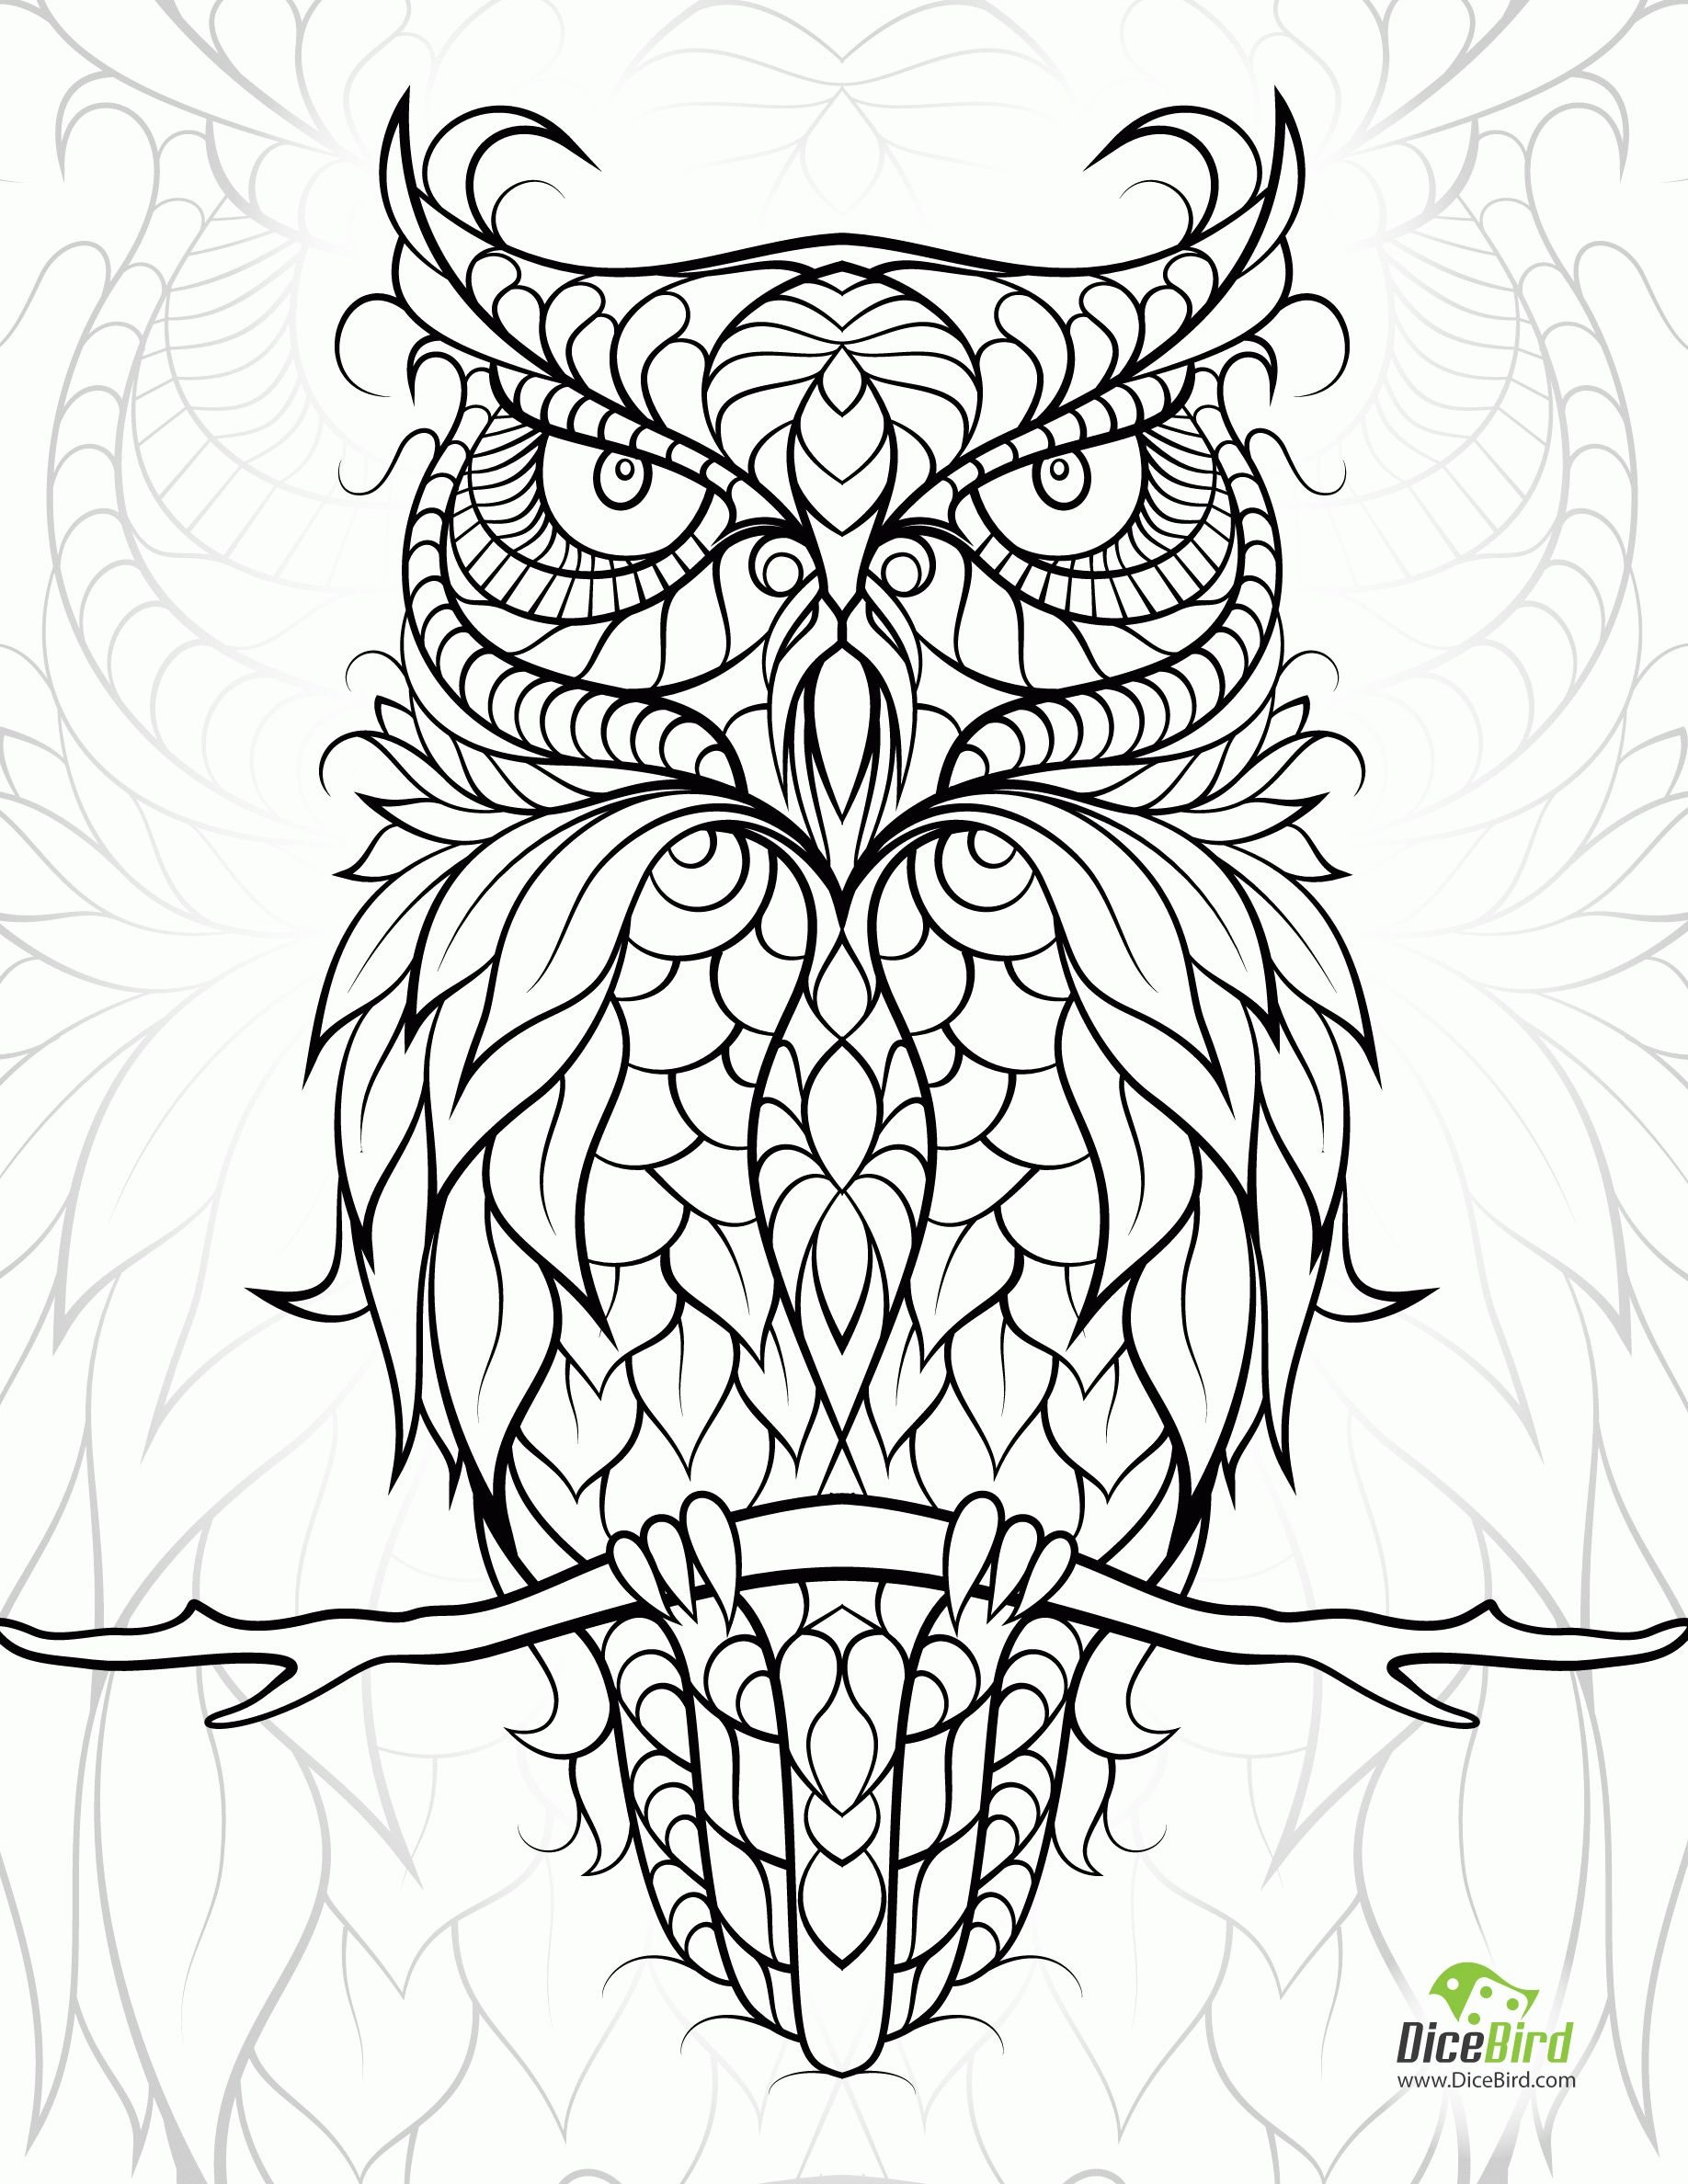 diceowl-free printable adult coloring pages